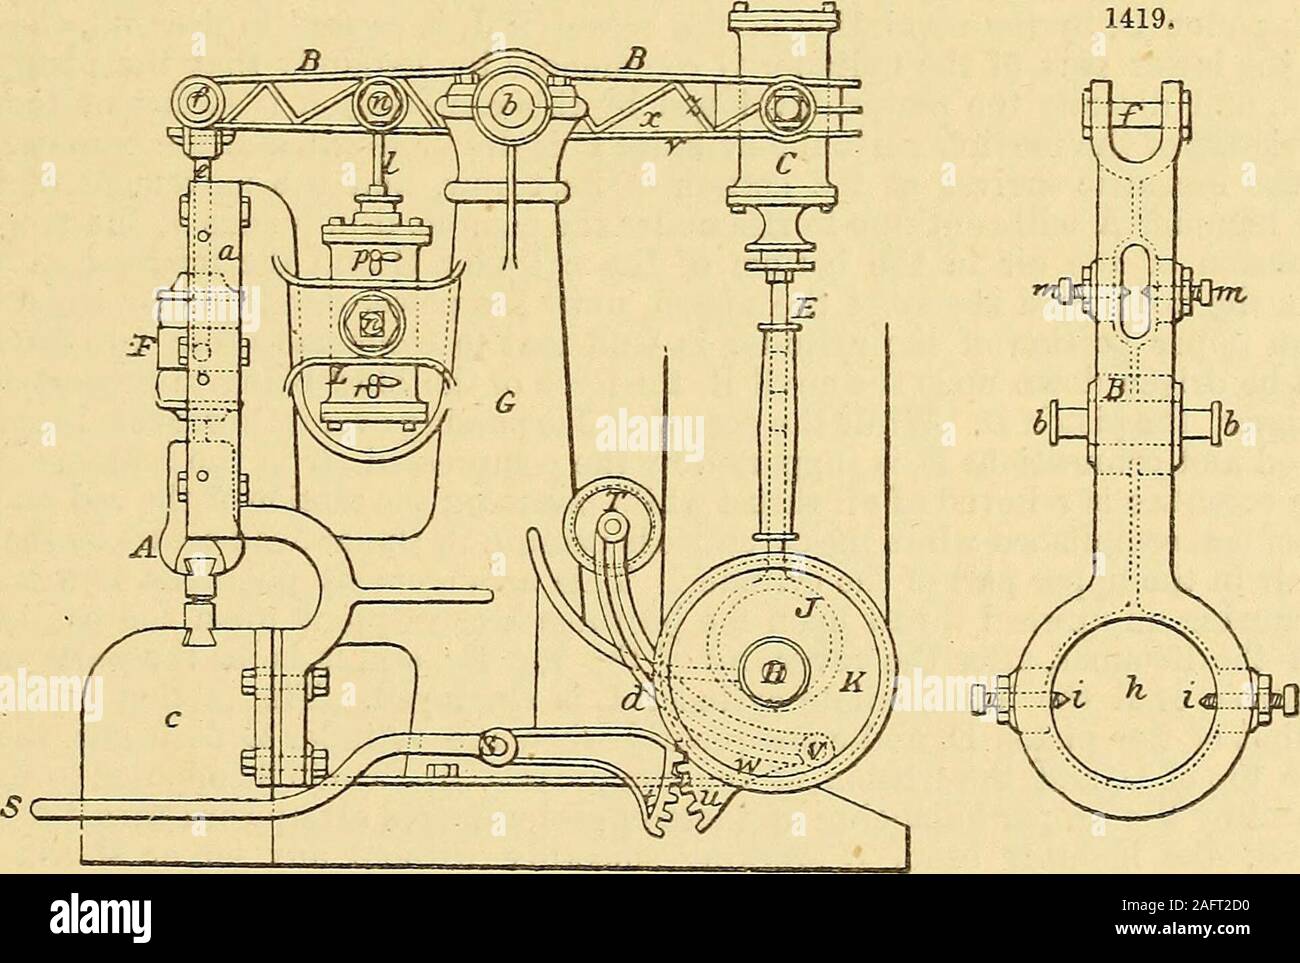 . Supplement to Spons dictionary of engineering, civil, mechanical, military, and naval. t N and worm O to revolve, and so moving the sector o andsector shaft I, to which is fixed the arm L ; this, according as the sector is moved in the one du-ec-tion or the other, increases or decreases the length of the lever J on the side K, thereby increasino-or shortening the distance through which the hammer F is raised and lowered, and so causing aheavy or light blow to be struck as required. To the lower arm of the toothed sector o is pivoteda rod E sliding freely in the guide r, and carrying two adju Stock Photo